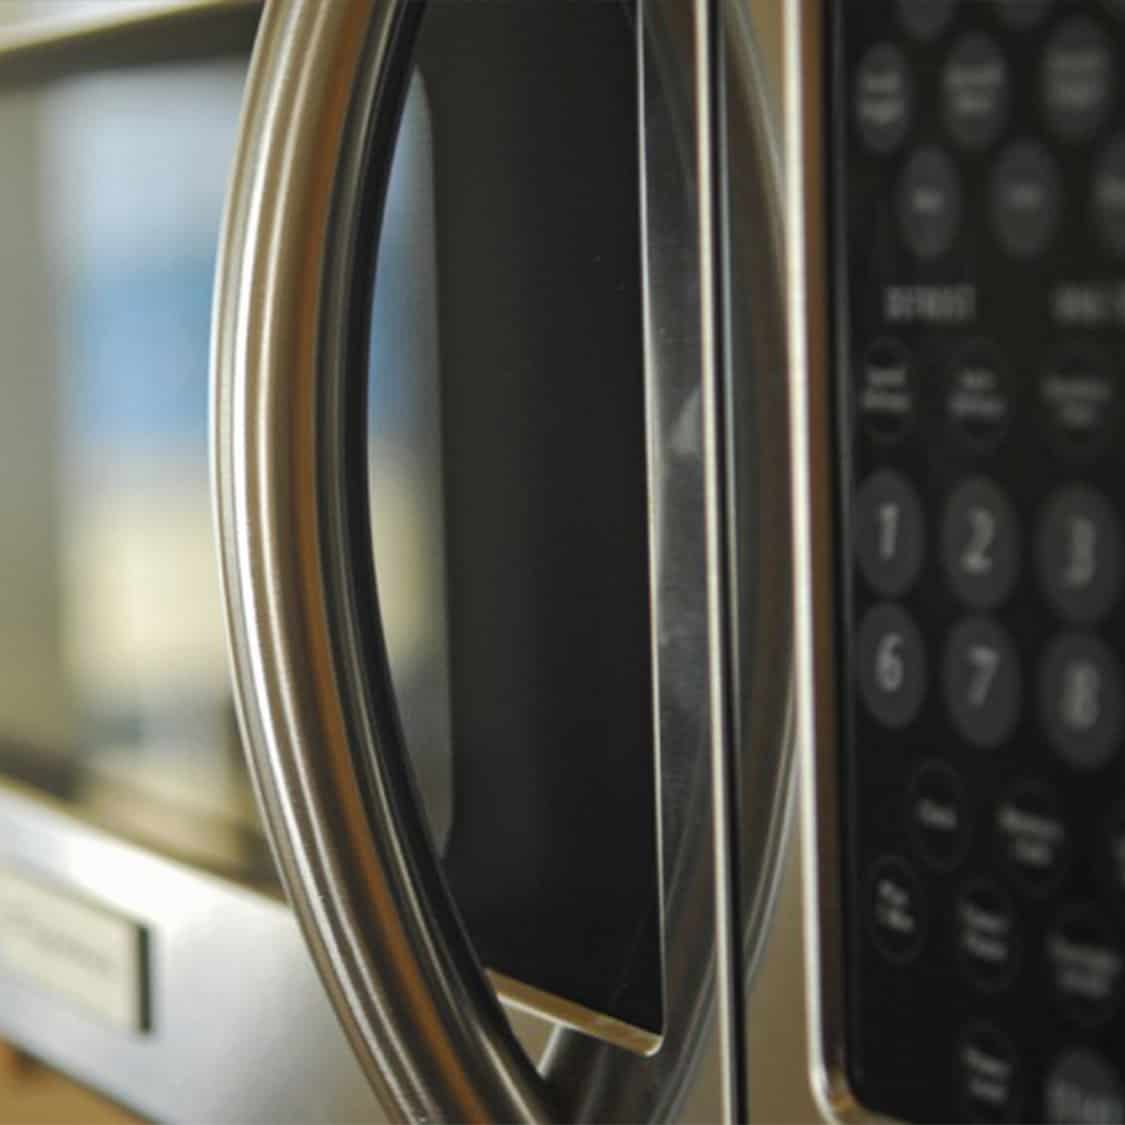 close up image of a microwave